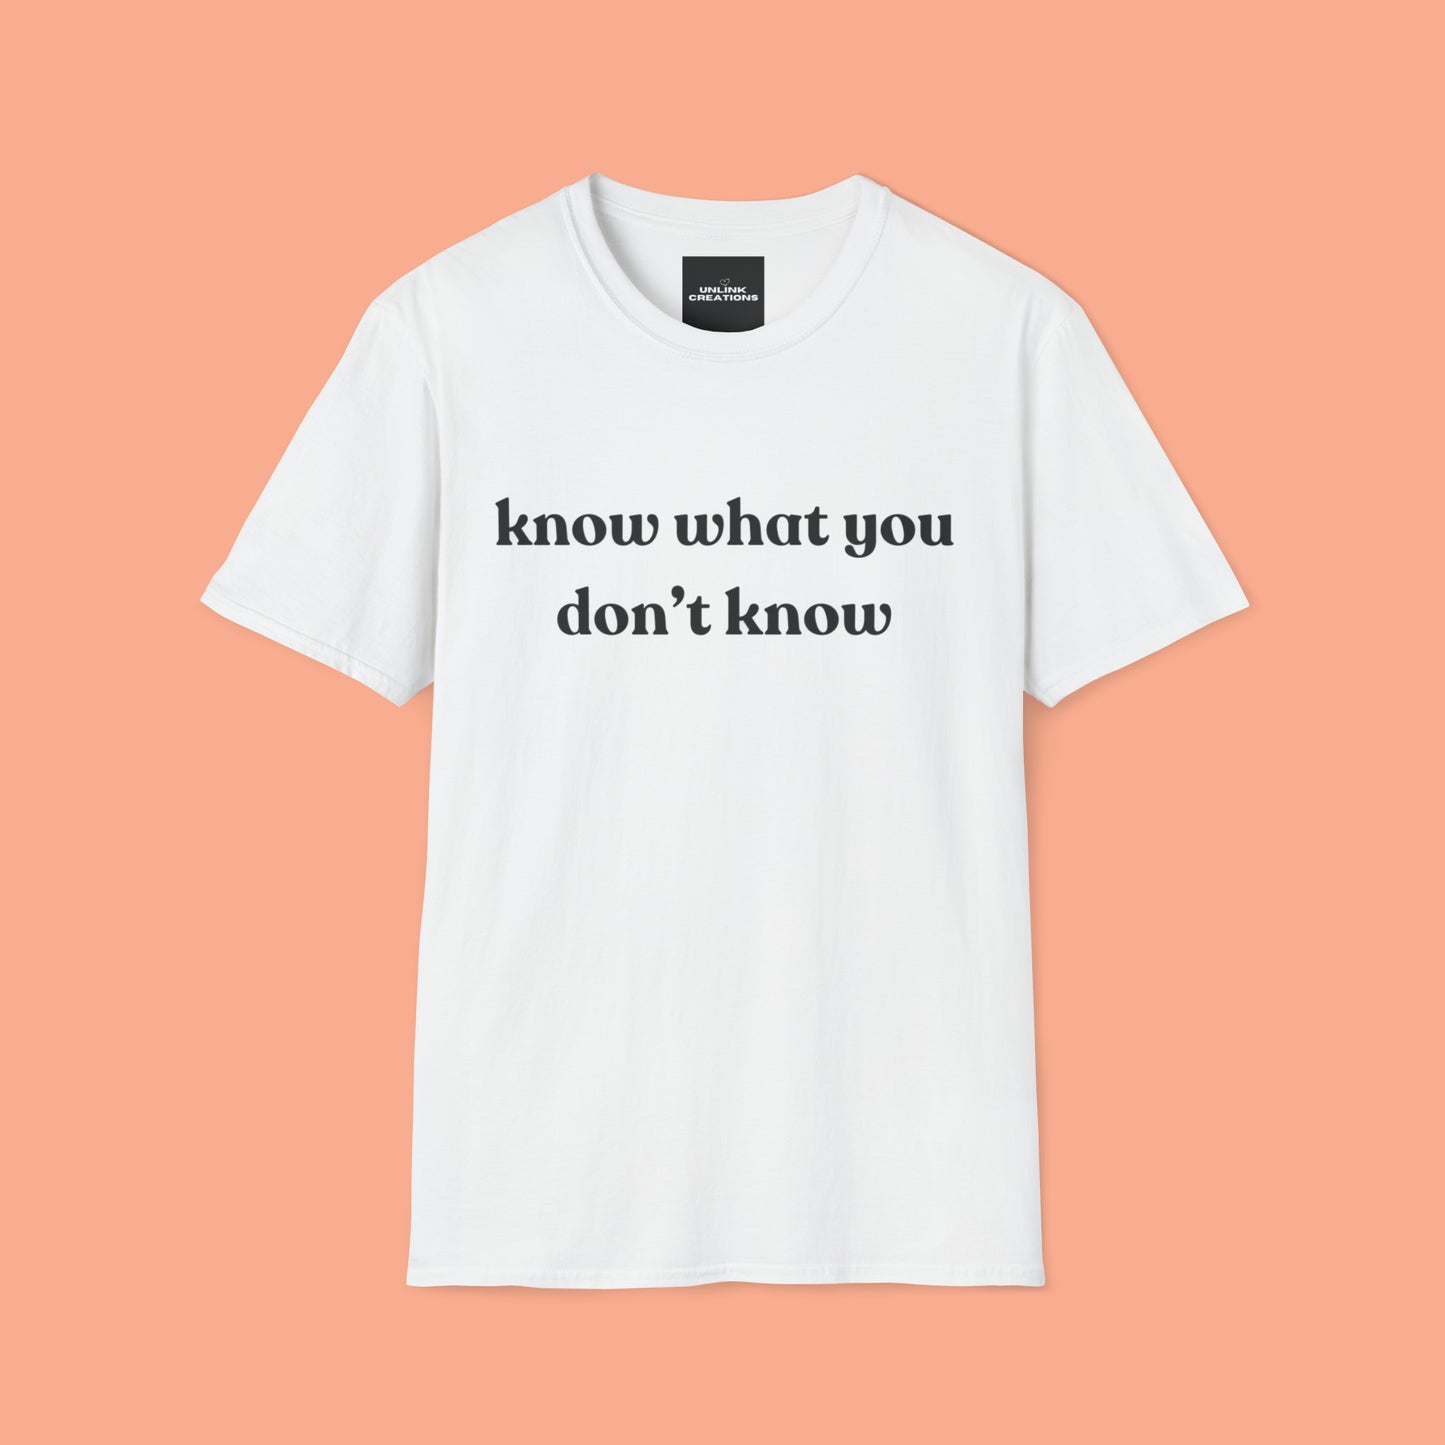 Simple “know what you don’t know” message on this Unisex Softstyle T-Shirt. Be curious and learn!